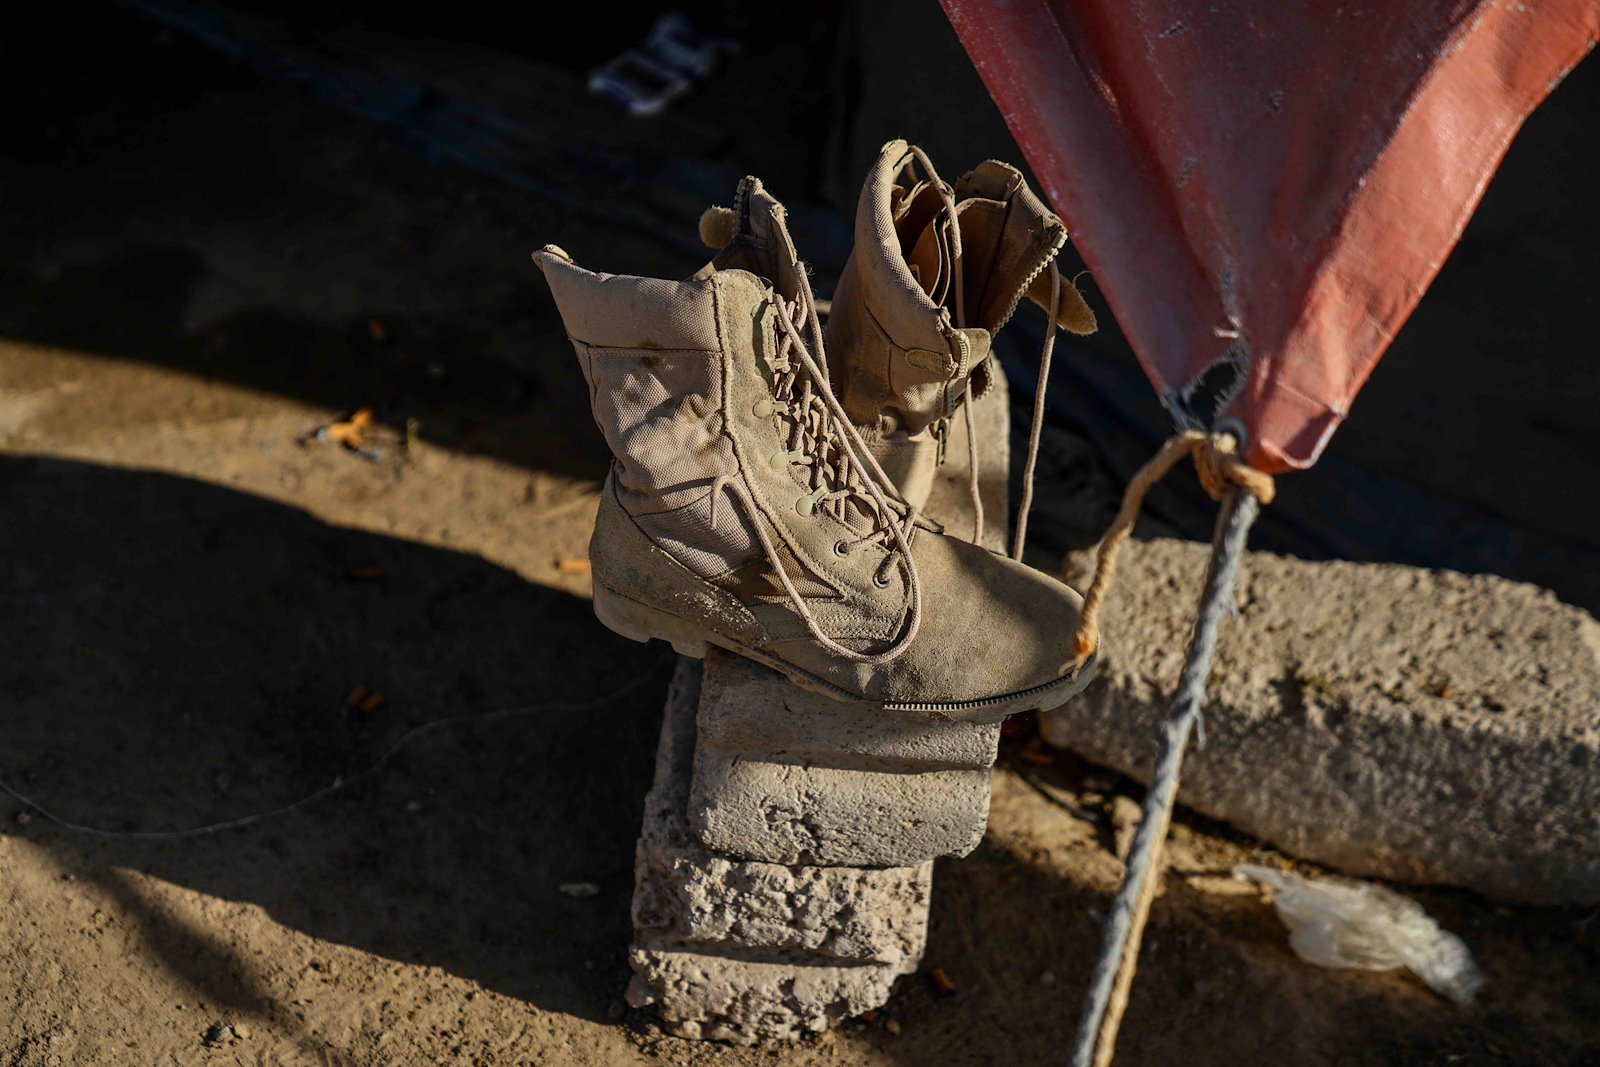 Boots outside a tent in a settlement on the outskirts of Marib in central Yemen. Well-made boots are an expensive and precious commodity for most migrants and refugees.